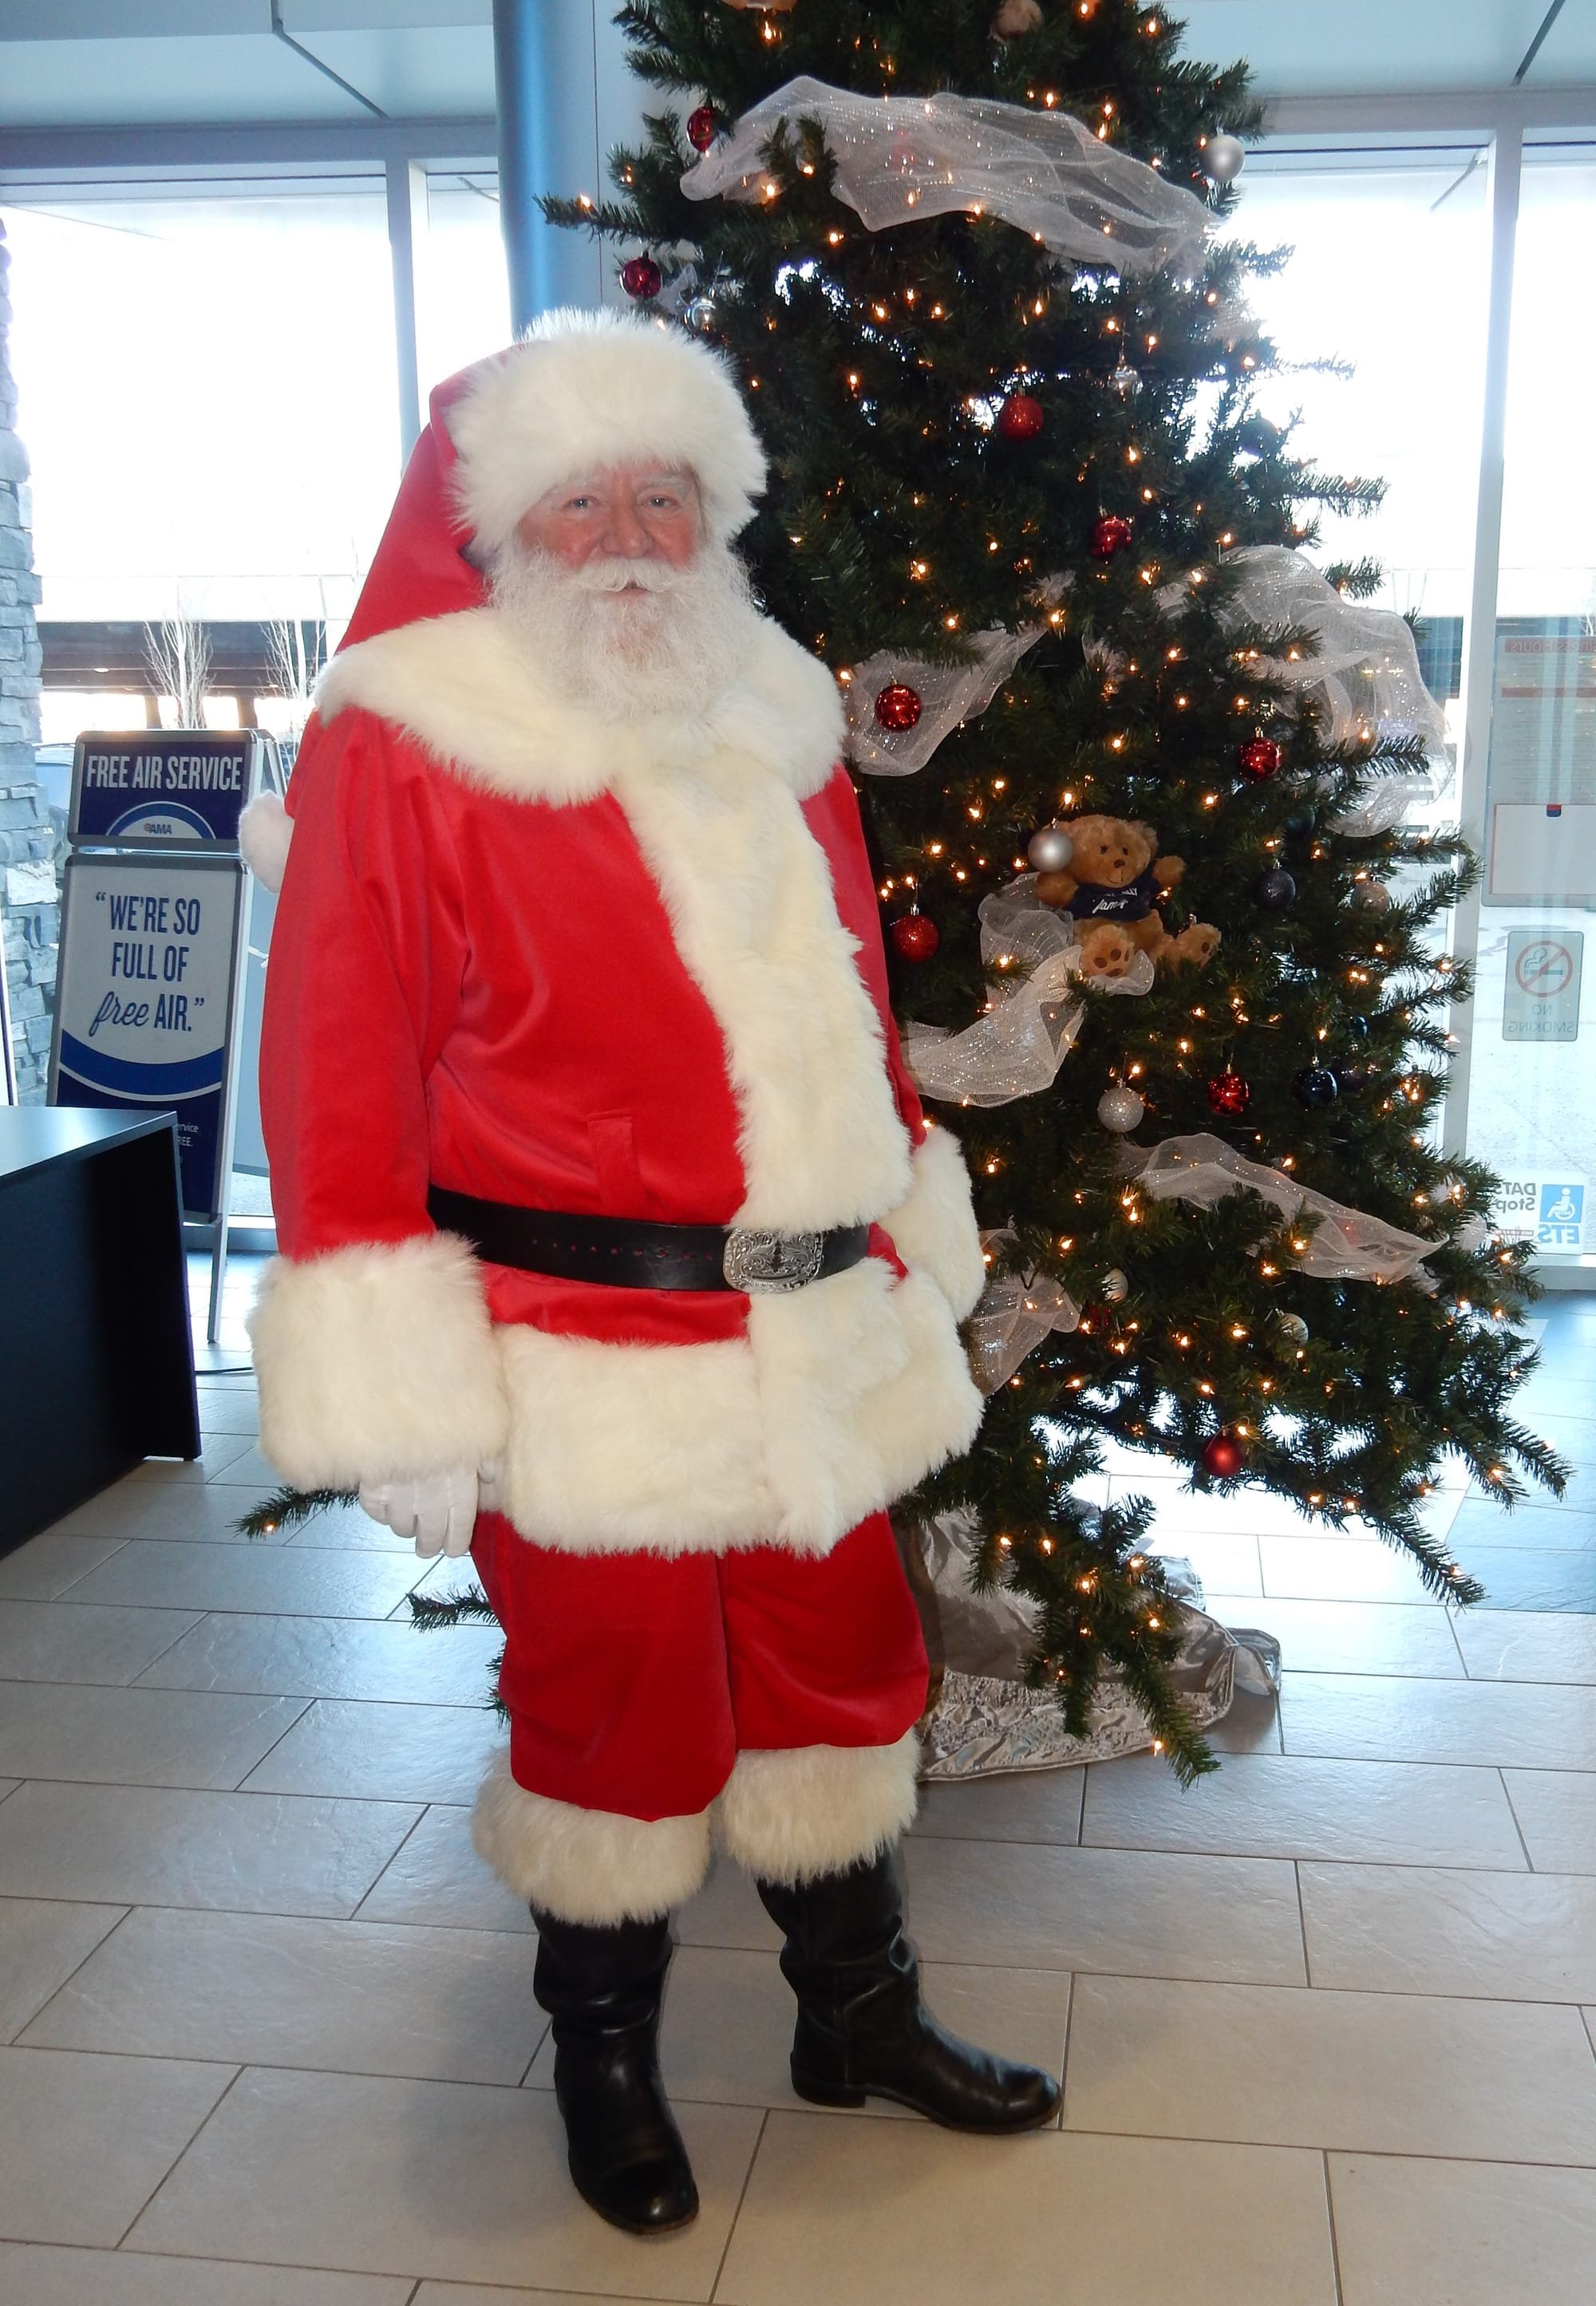 Book now and let Edmonton's Santa Claus add that extra sparkle to your holiday event!